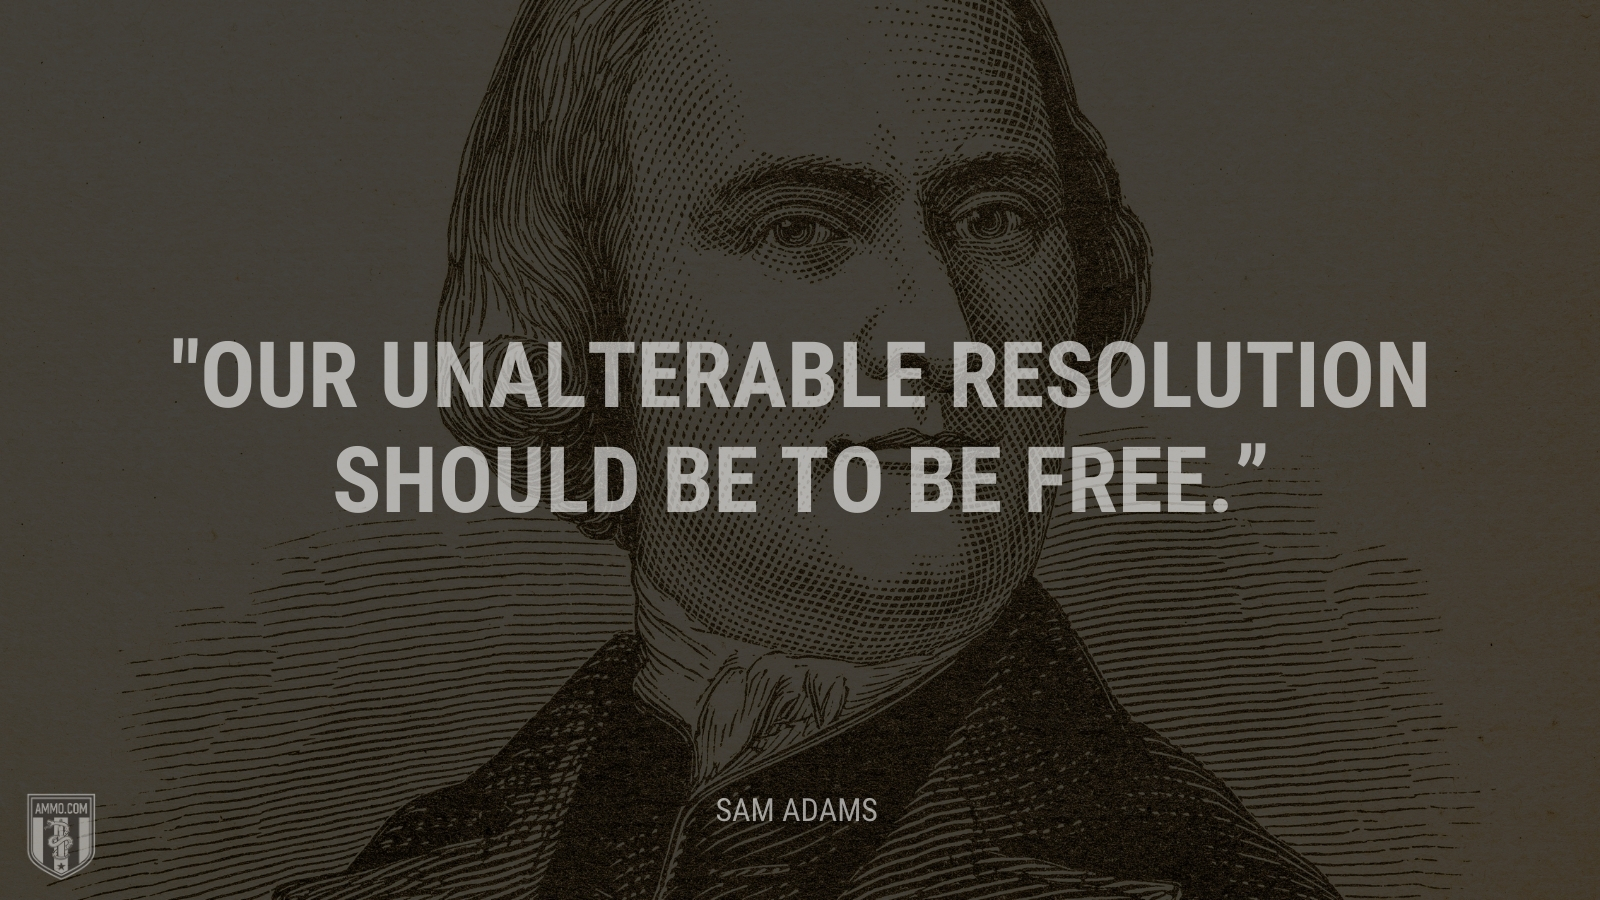 “Our unalterable resolution should be to be free.” - Sam Adams